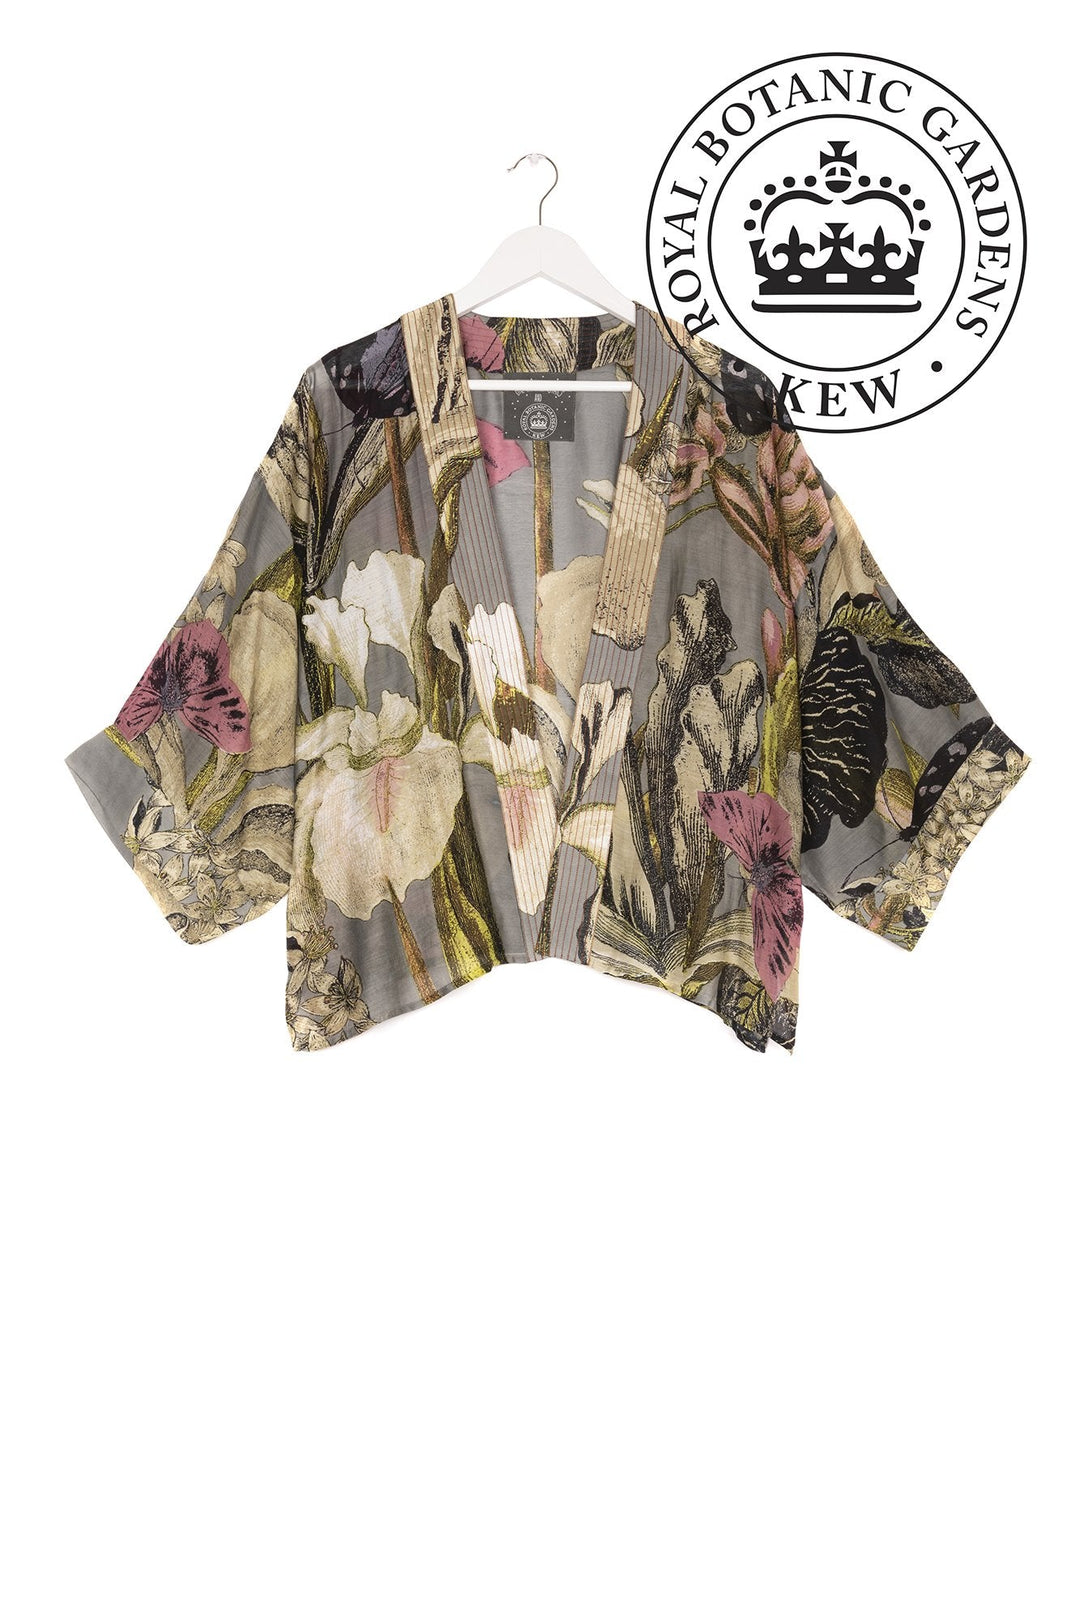 KEW Iris Grey Kimono- Our bestselling kimono jackets have loose ¾ length sleeves, an open front and a lightly embroidered lapel. Pair with a matching camisole and your favourite jeans in summer or layer over a polo neck during the cooler months.